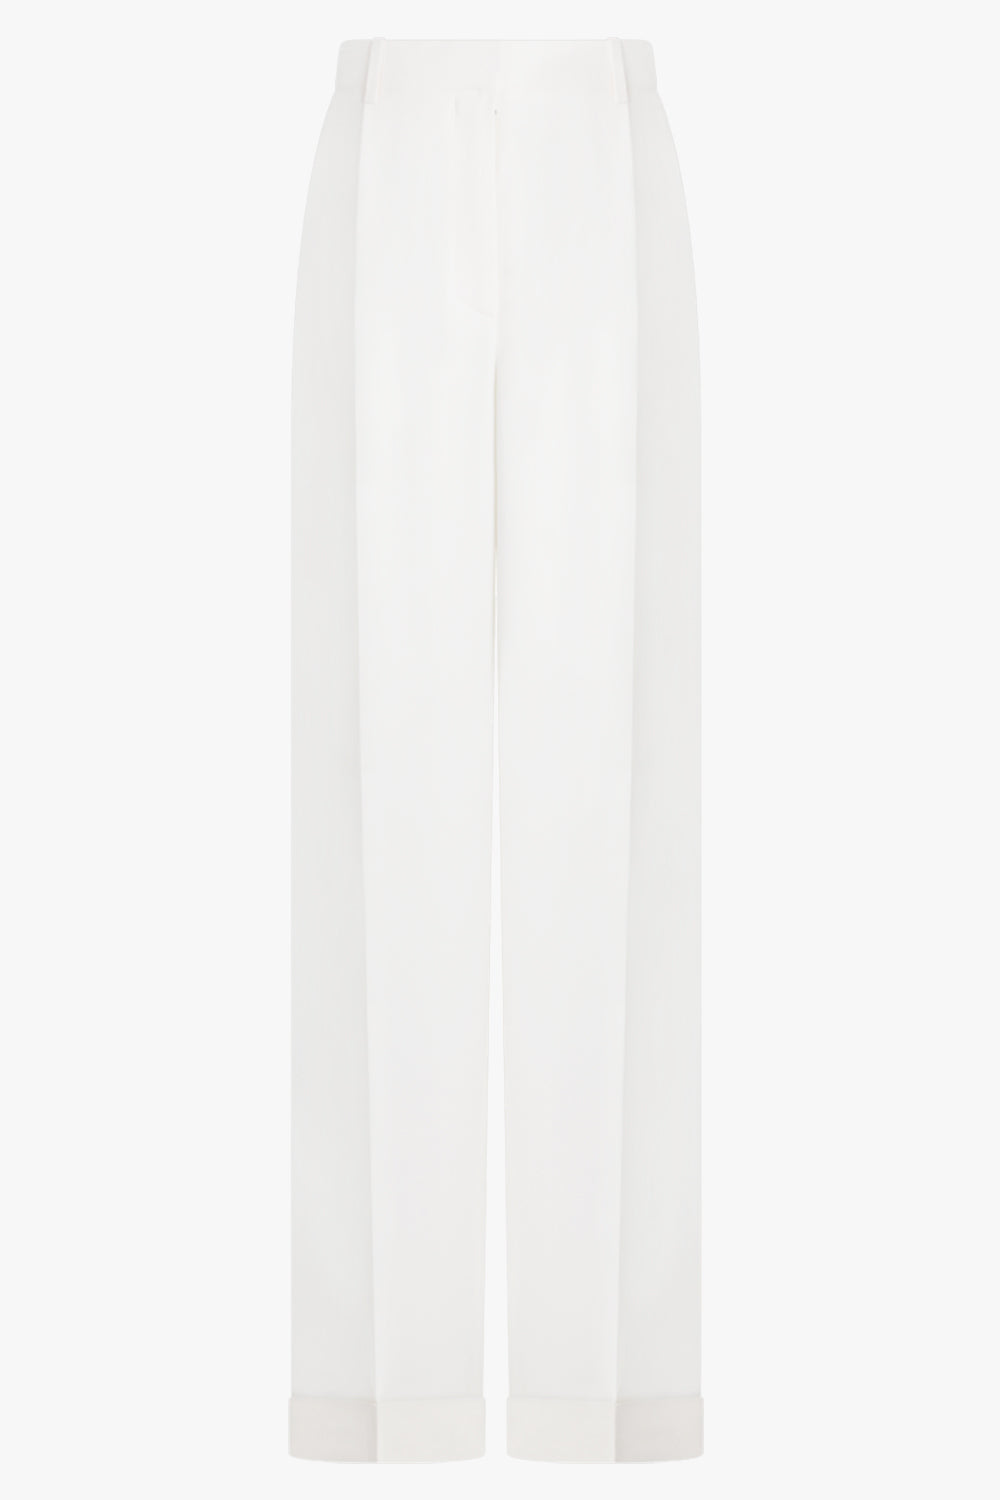 THE ROW RTW Tor Tailored Pant | White